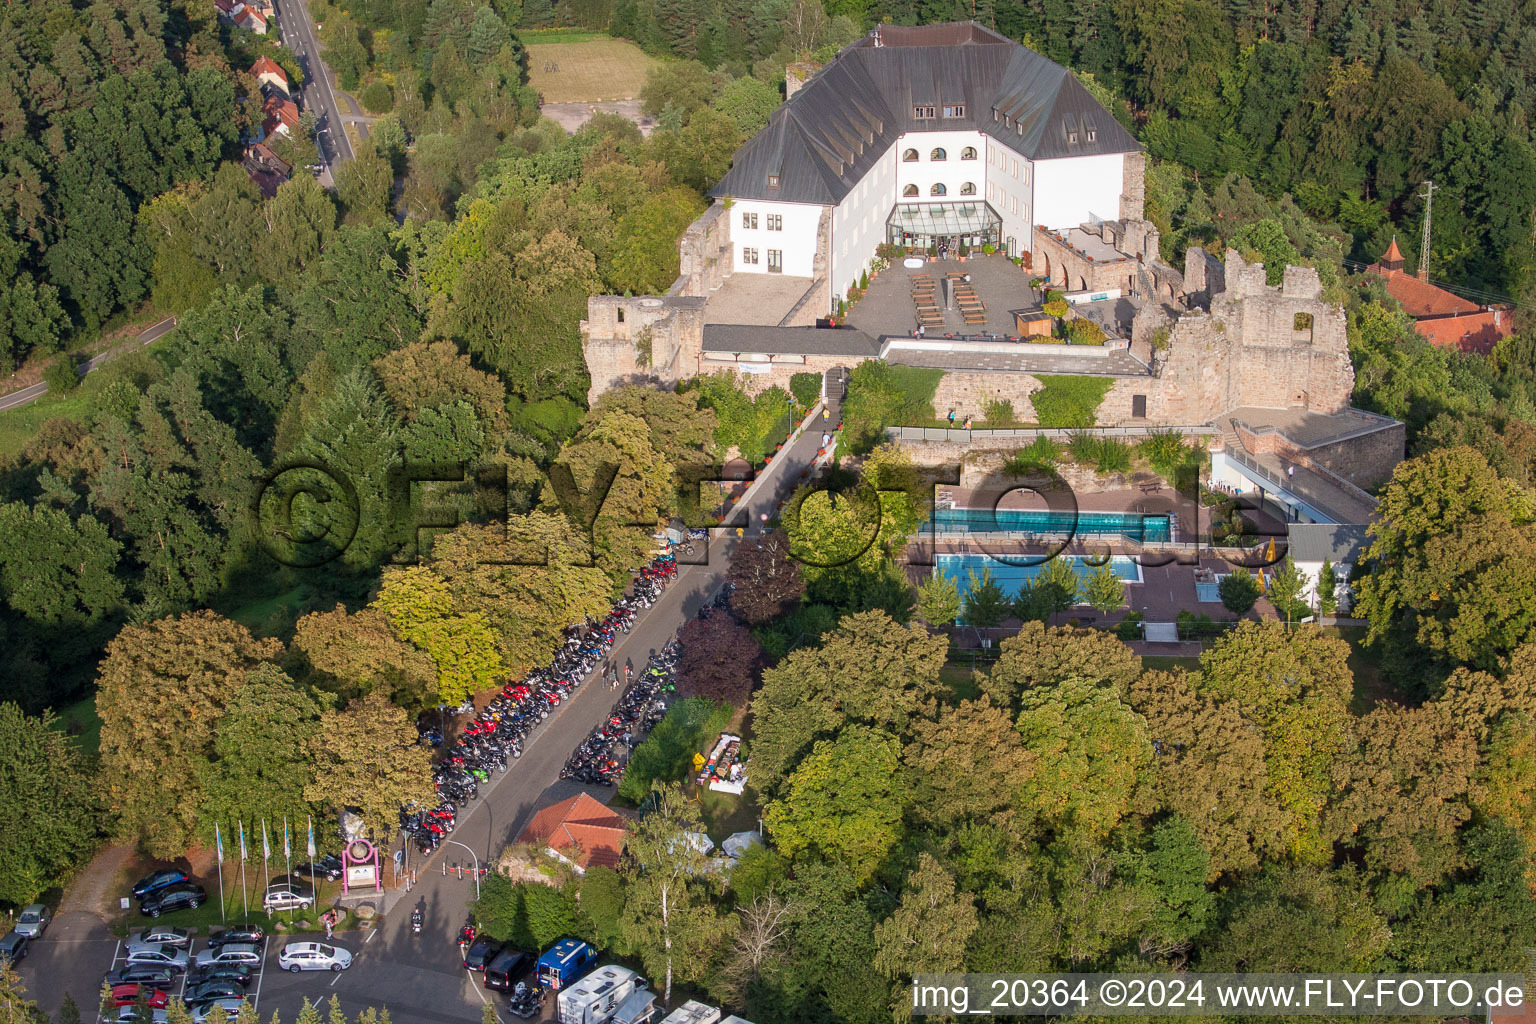 Aerial view of Building the hostel Burg Altleiningen in the district Hoeningen in Altleiningen in the state Rhineland-Palatinate